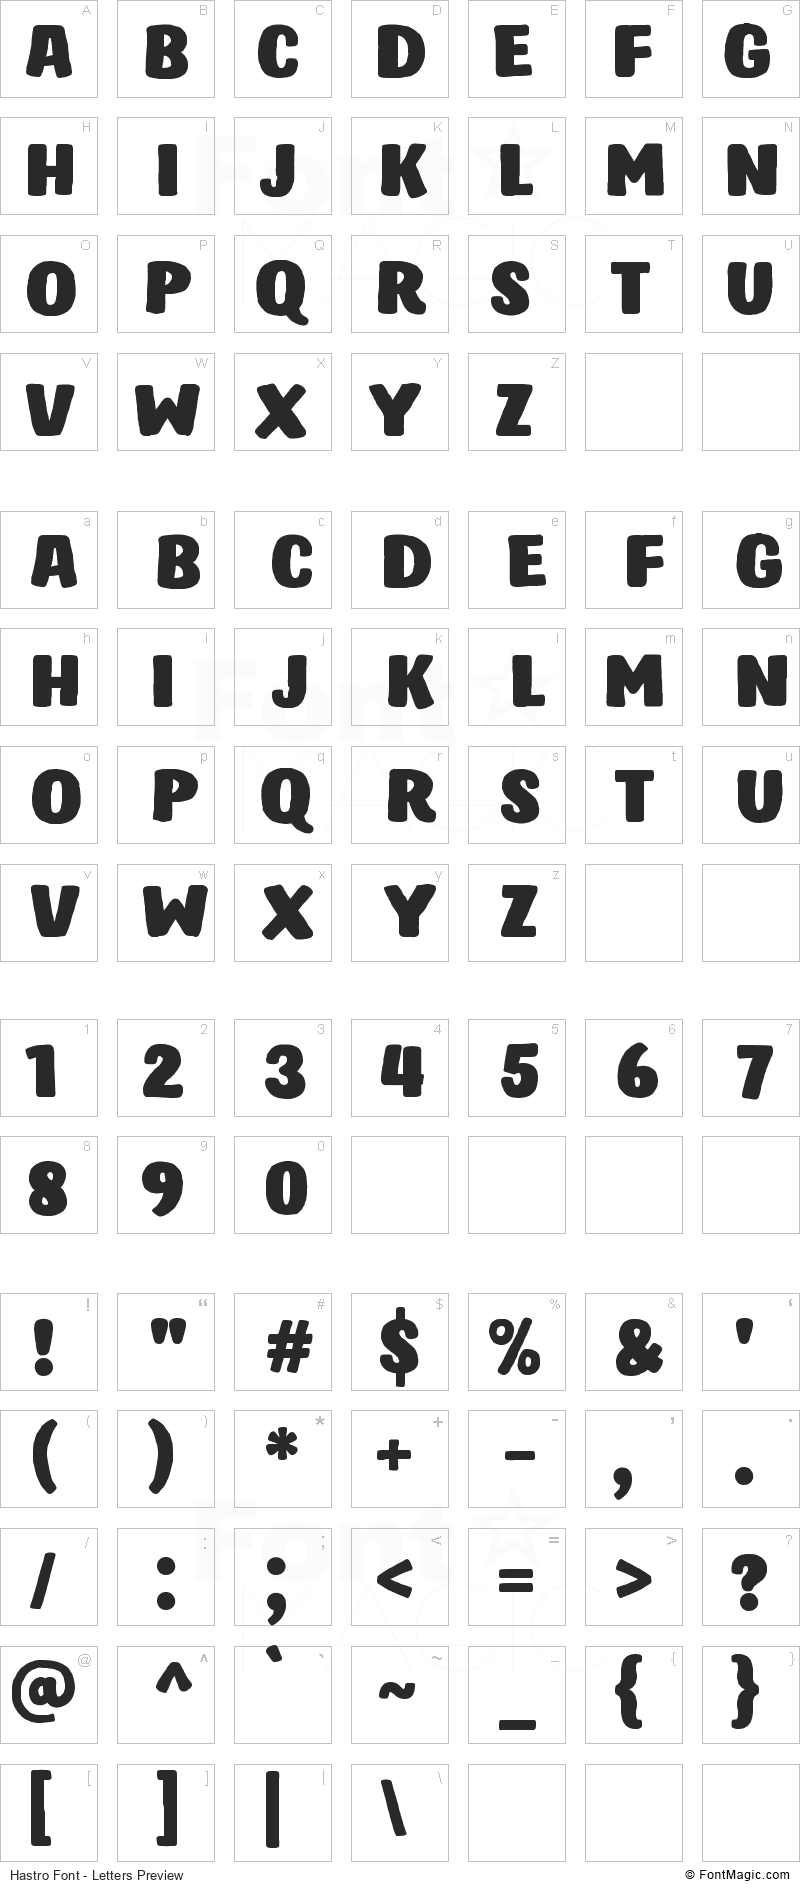 Hastro Font - All Latters Preview Chart